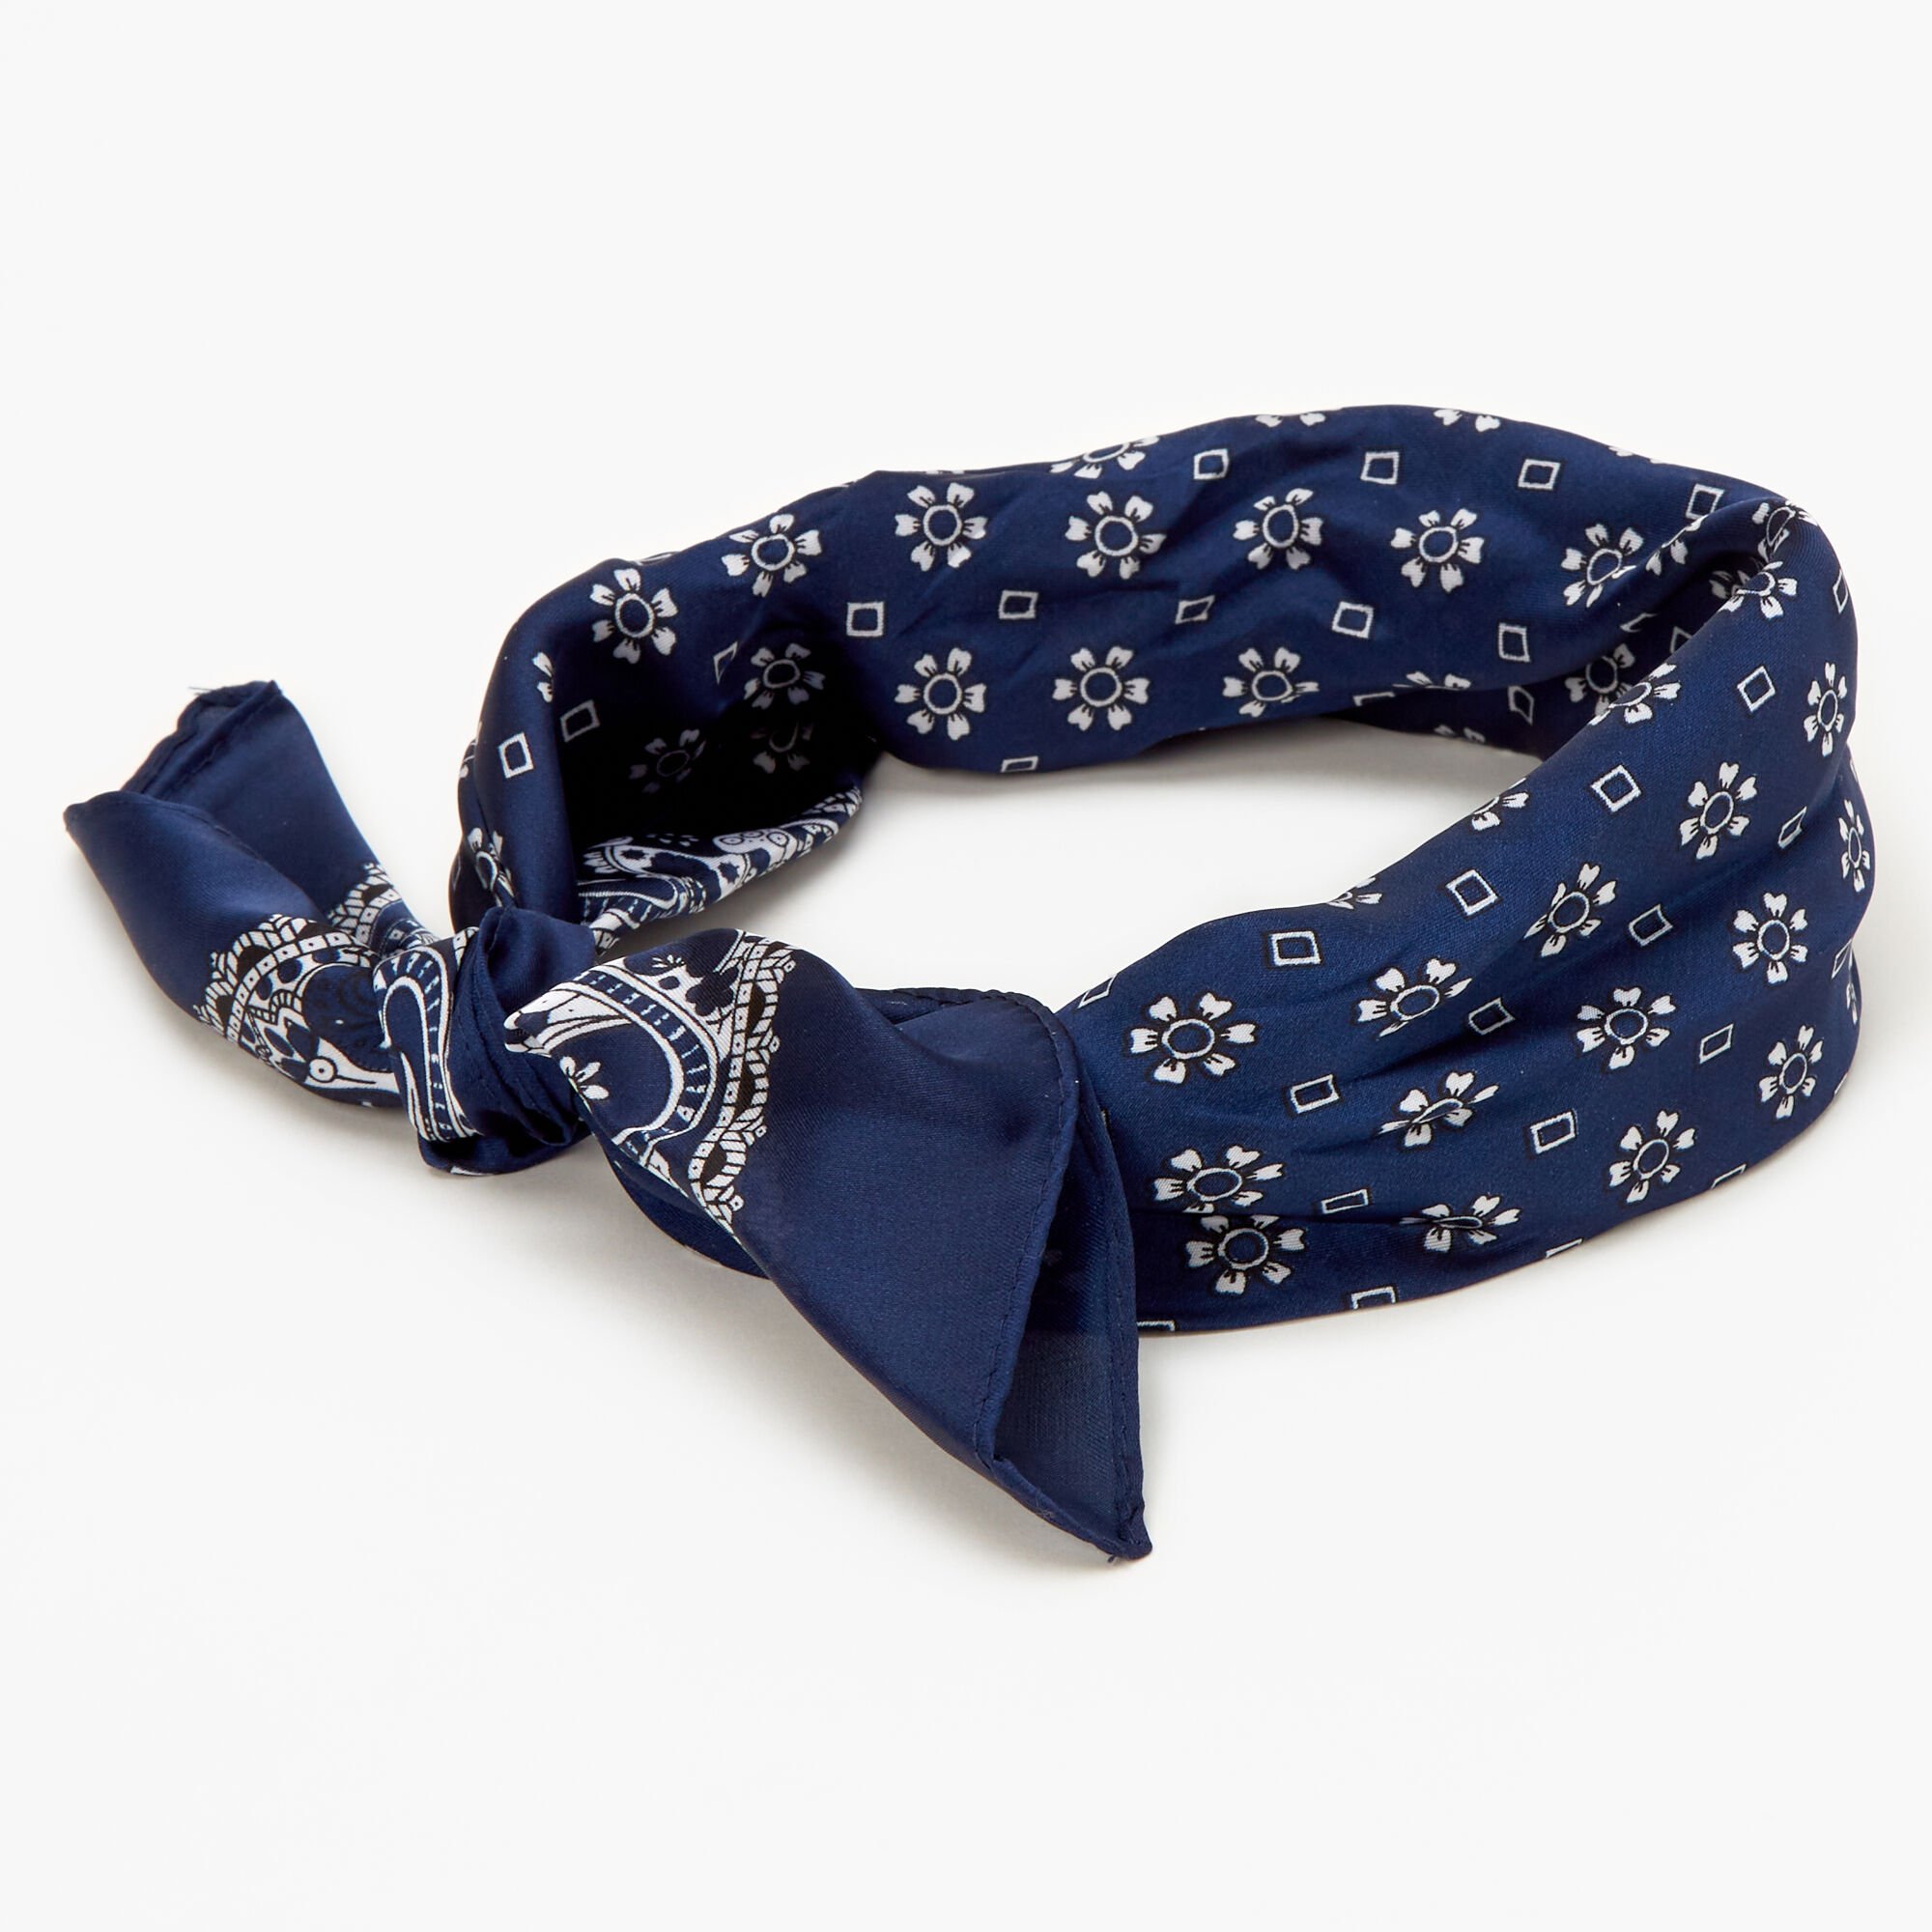 View Claires Floral Paisley Silky Bandana Headwrap Navy information